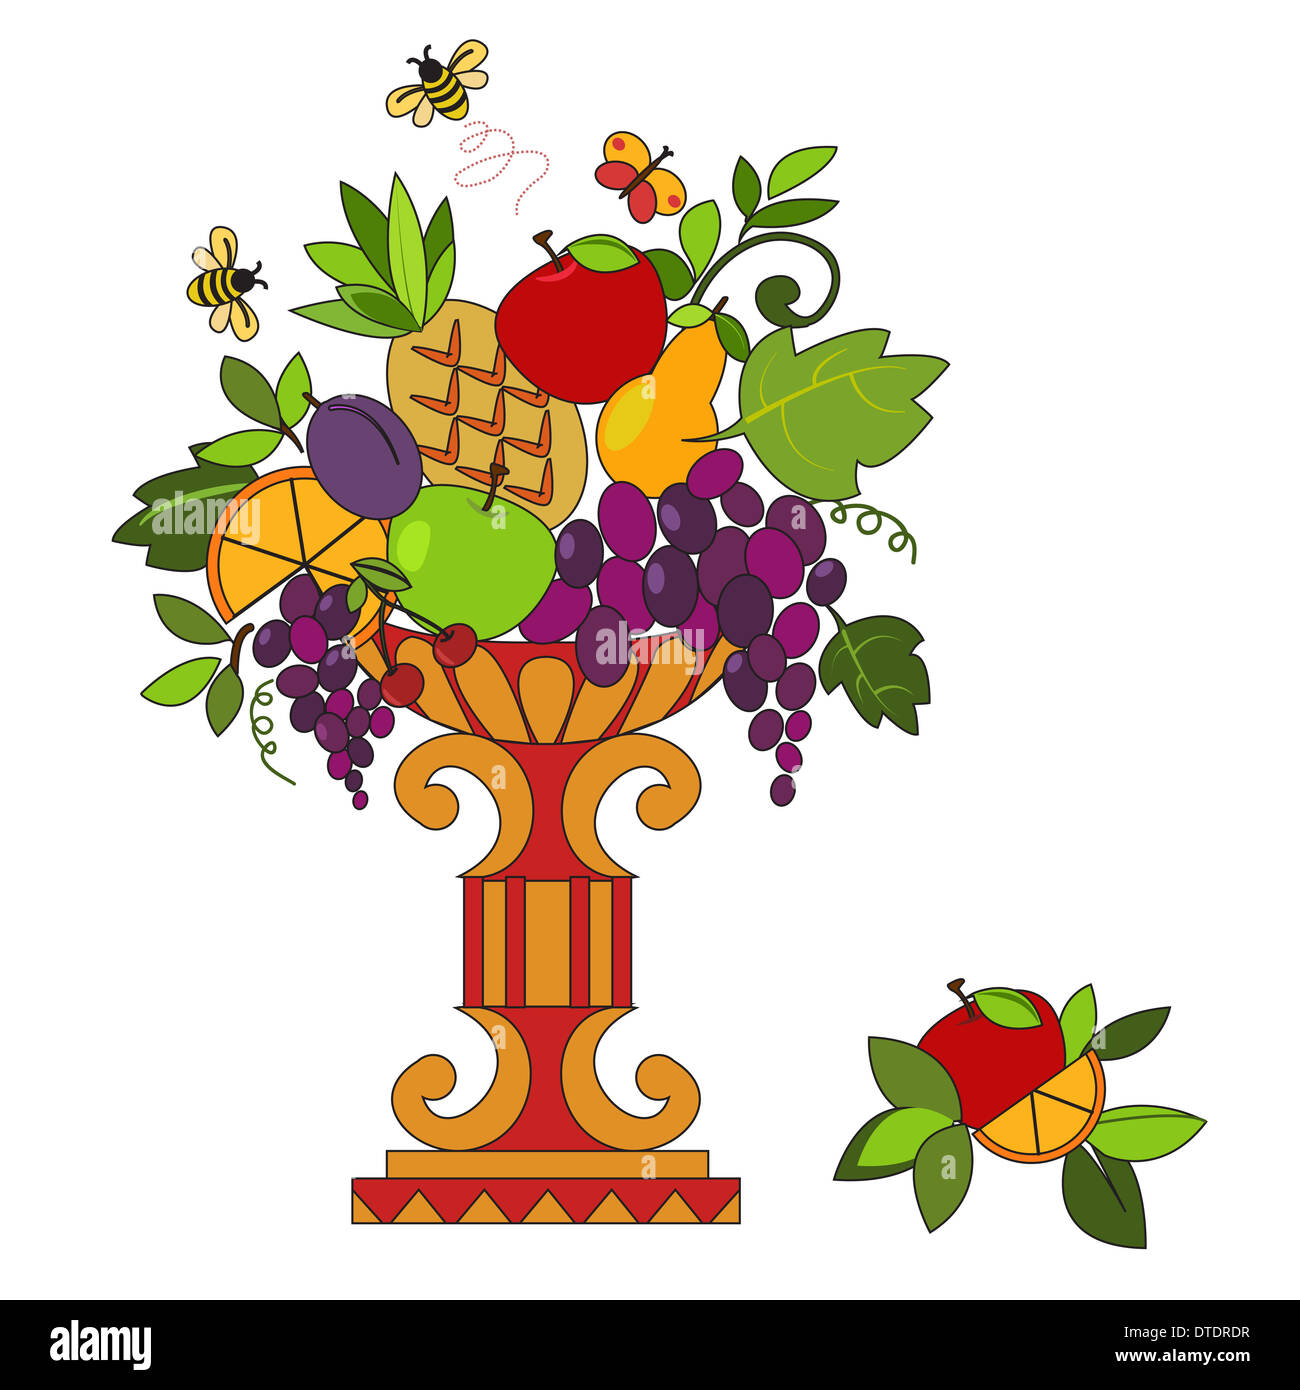 The group of fruits in bowl. Vector illustration Stock Photo